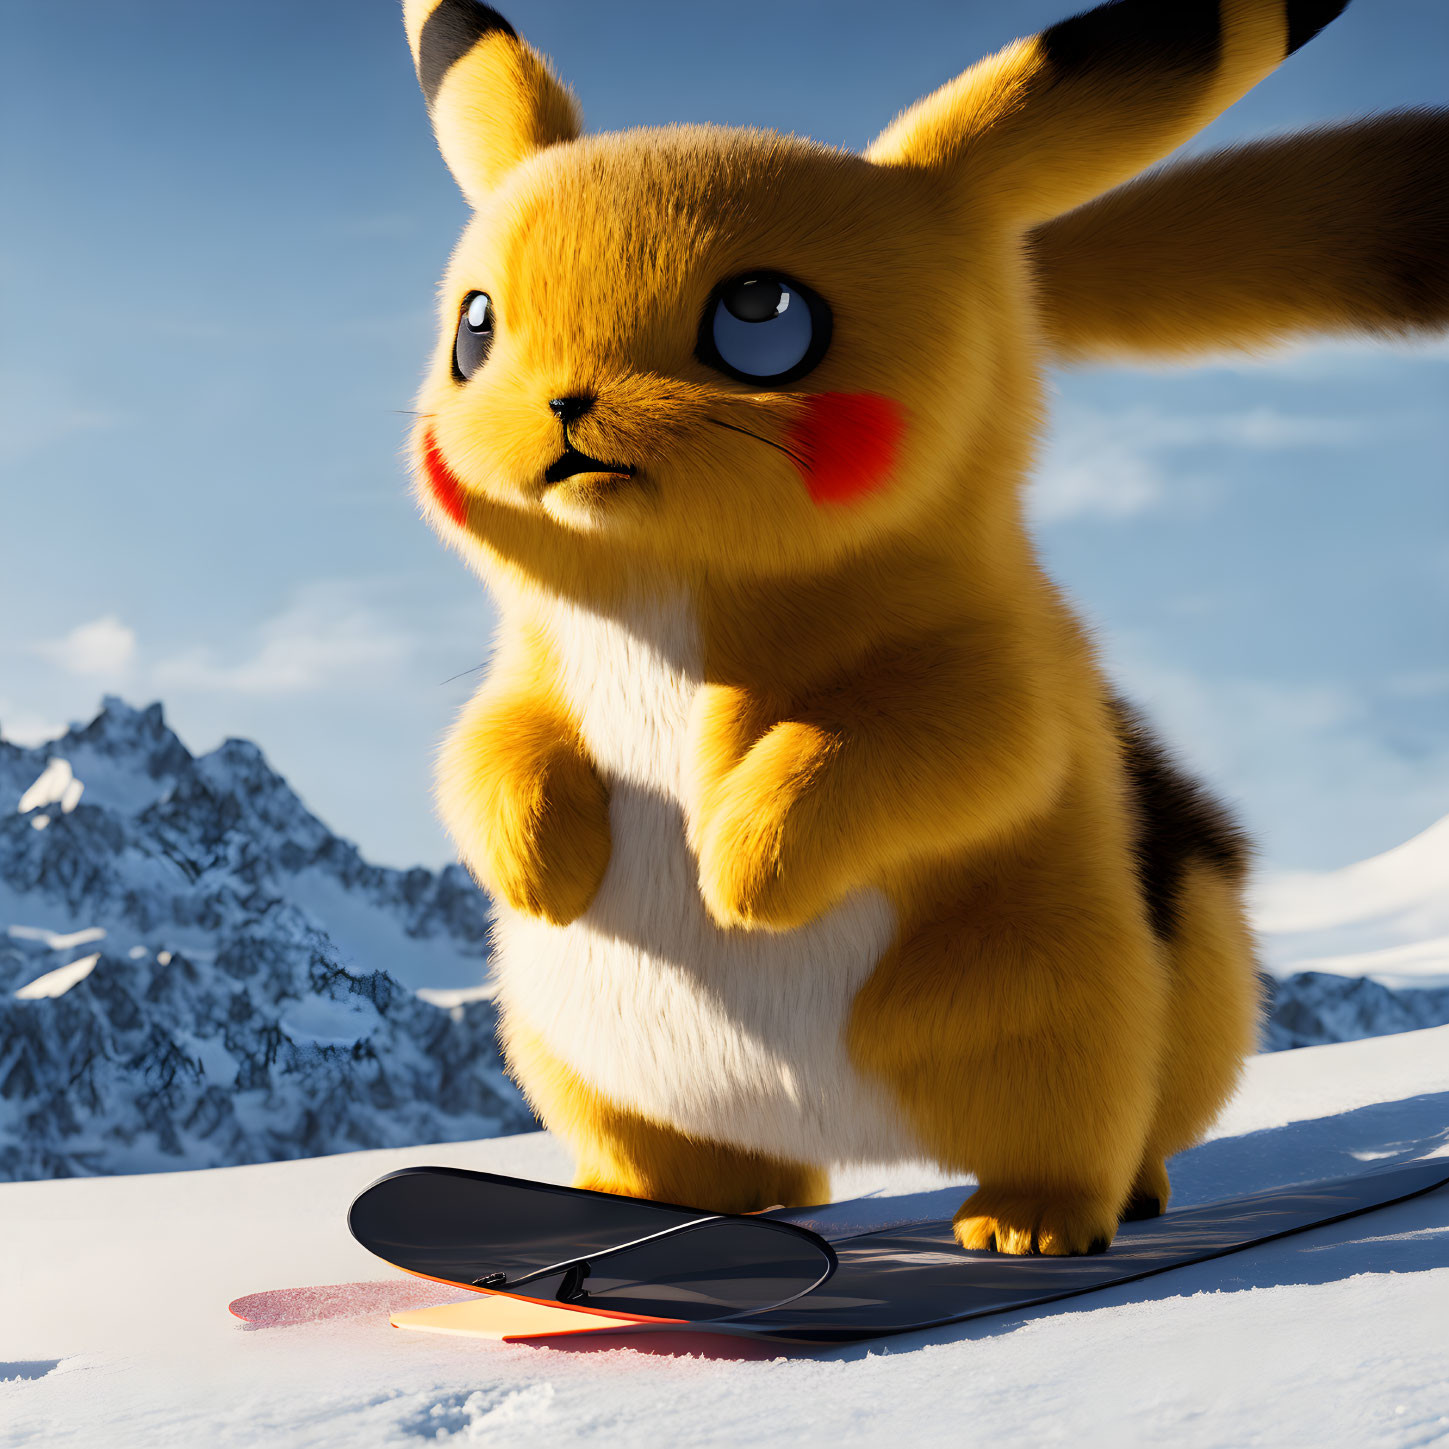 Computer-generated Pikachu on snowboard in snowy mountains